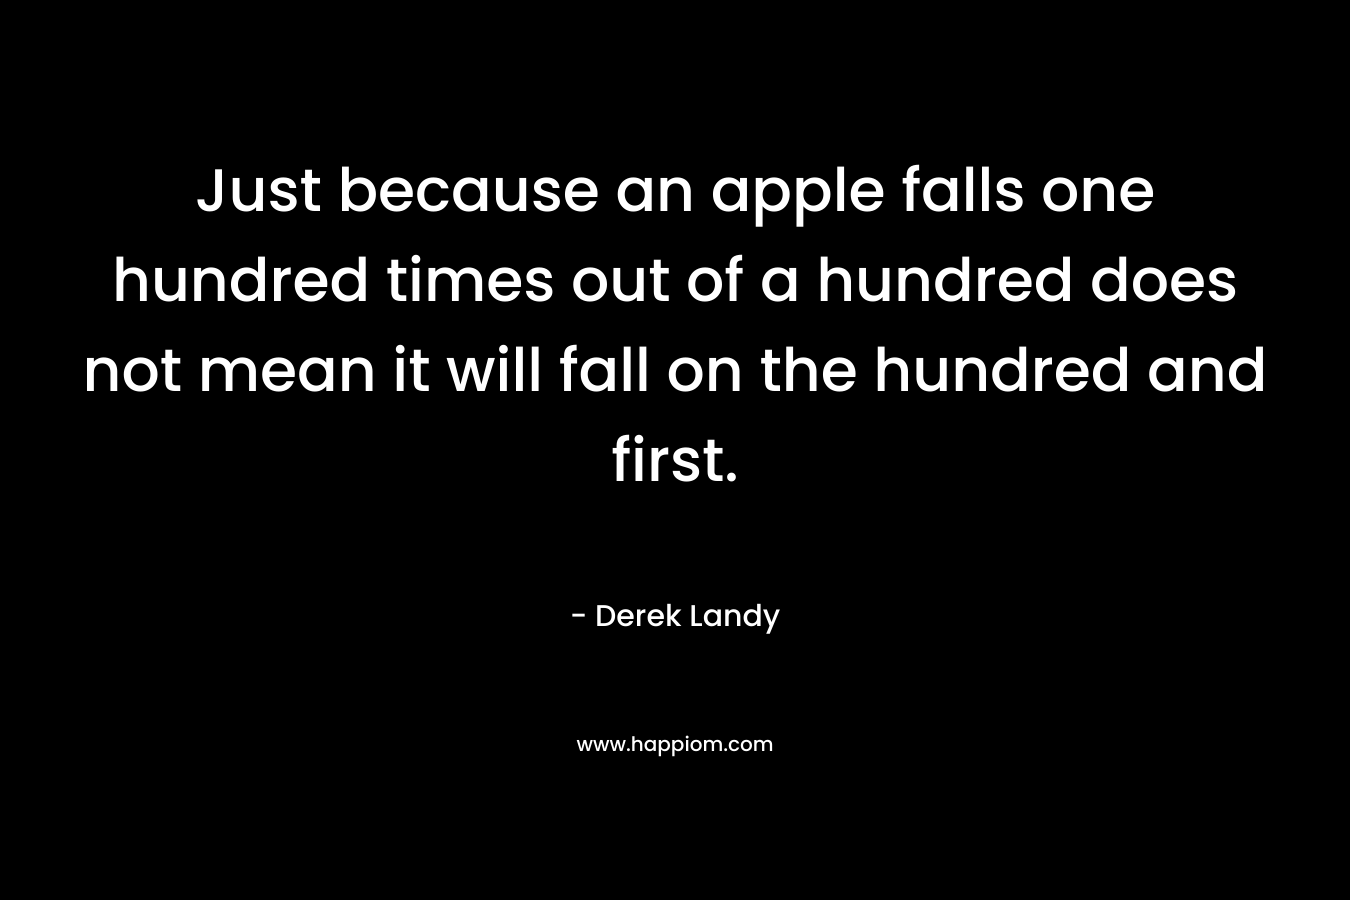 Just because an apple falls one hundred times out of a hundred does not mean it will fall on the hundred and first.